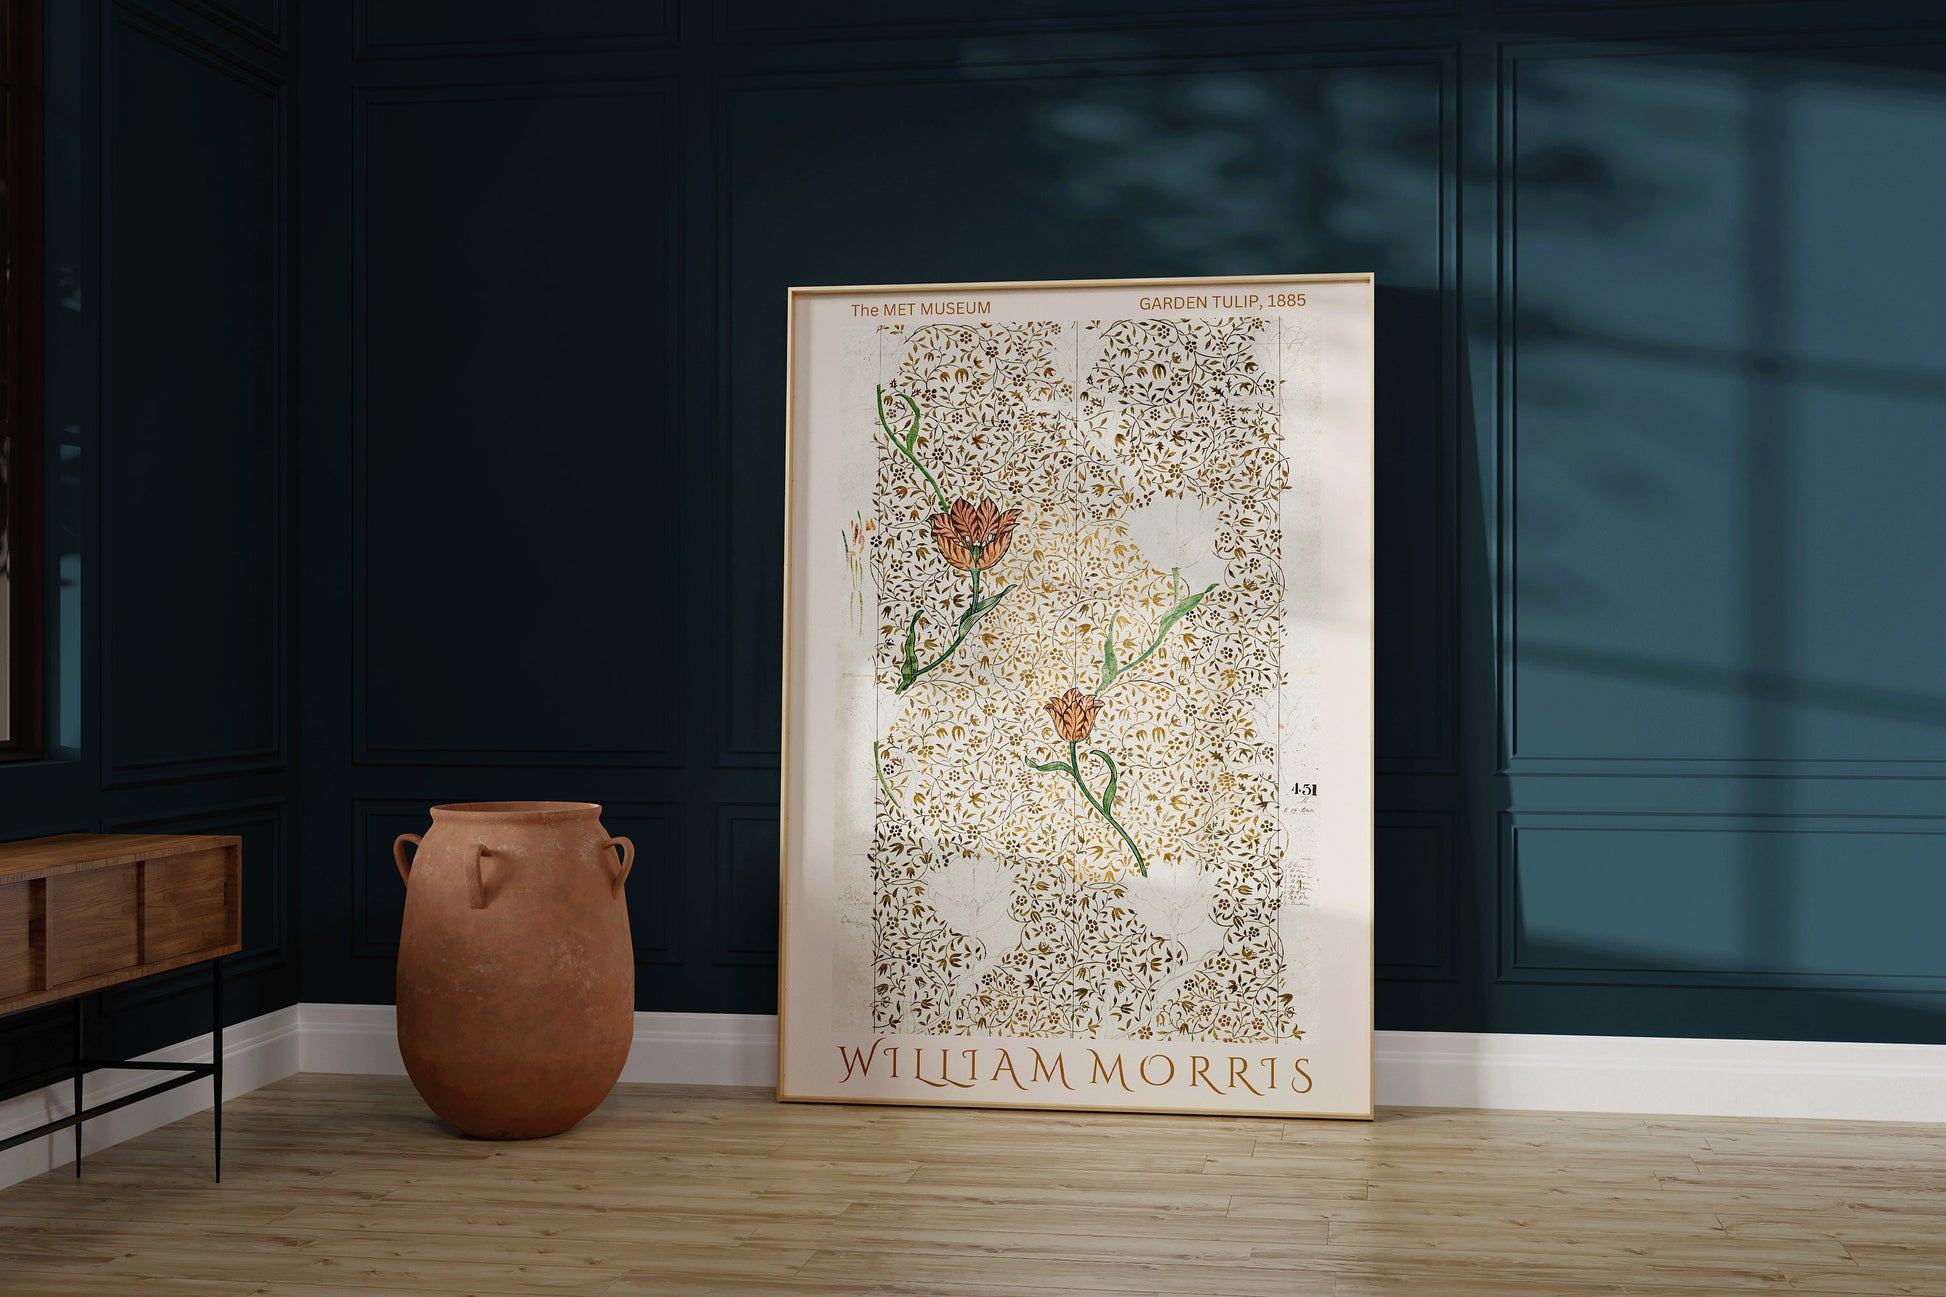 Framed Gold William Morris Poster Exhibition Poster Art Print Nouveau Flower Pattern Museum Market Framed Ready to Hang Home office Decor